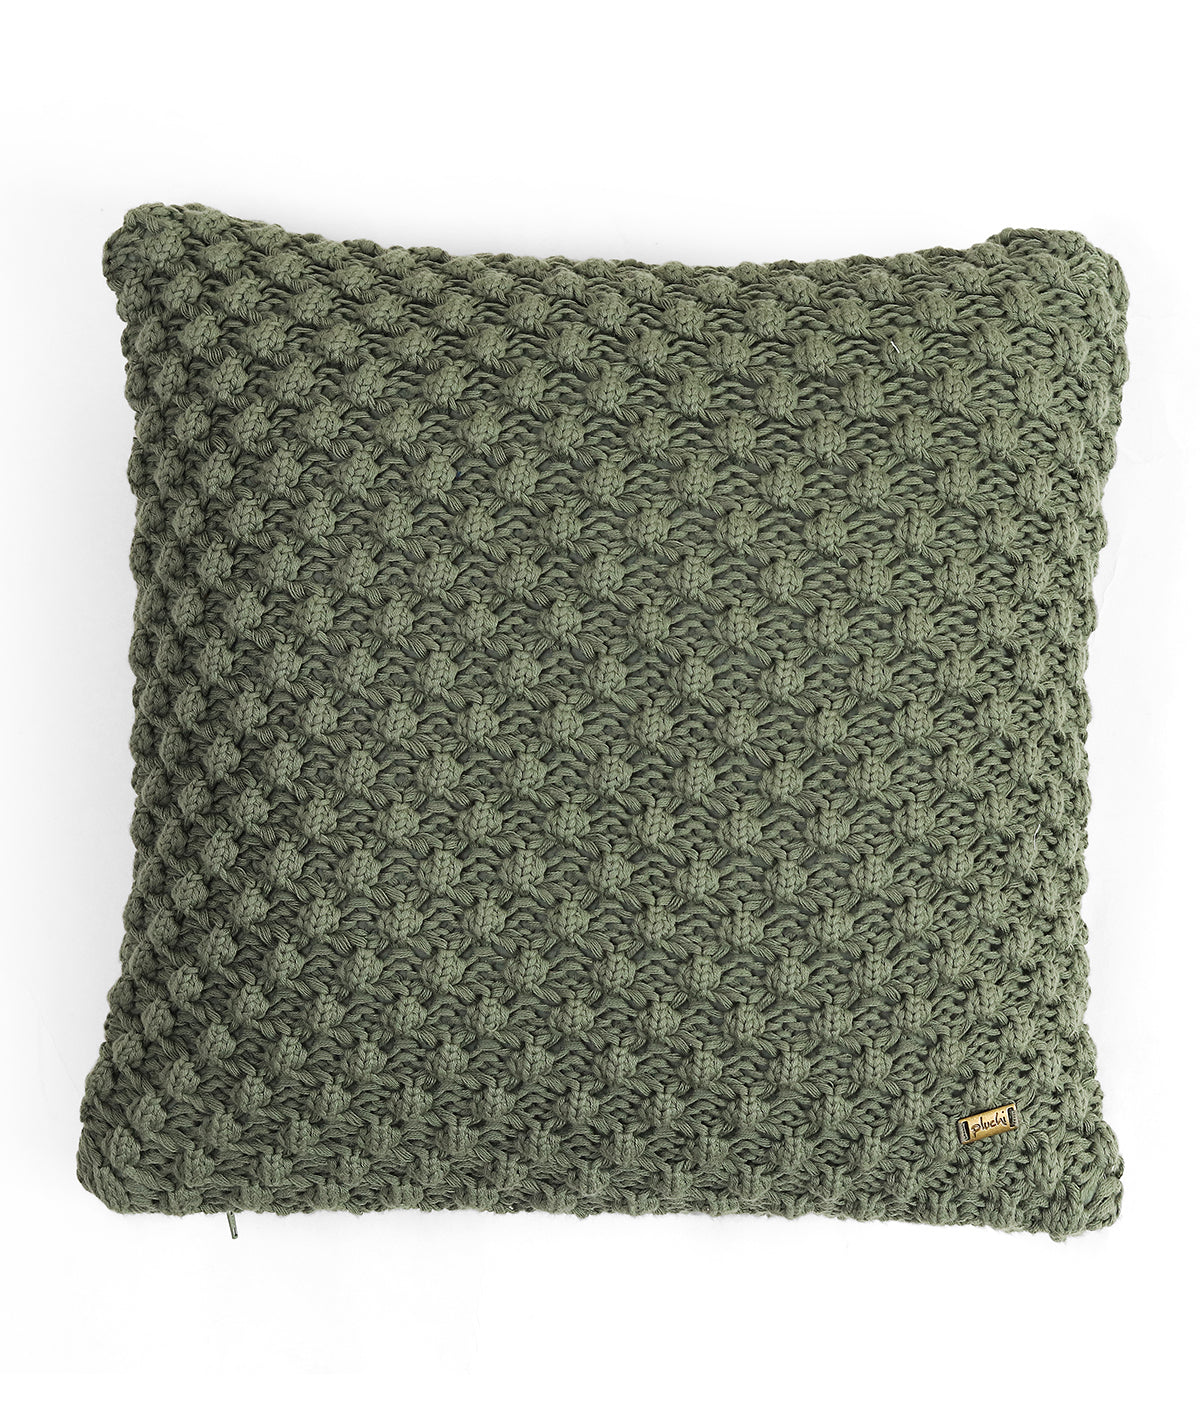 Popcorn Aqua Green Cotton Knitted Decorative 16 X 16 Inches Cushion Cover